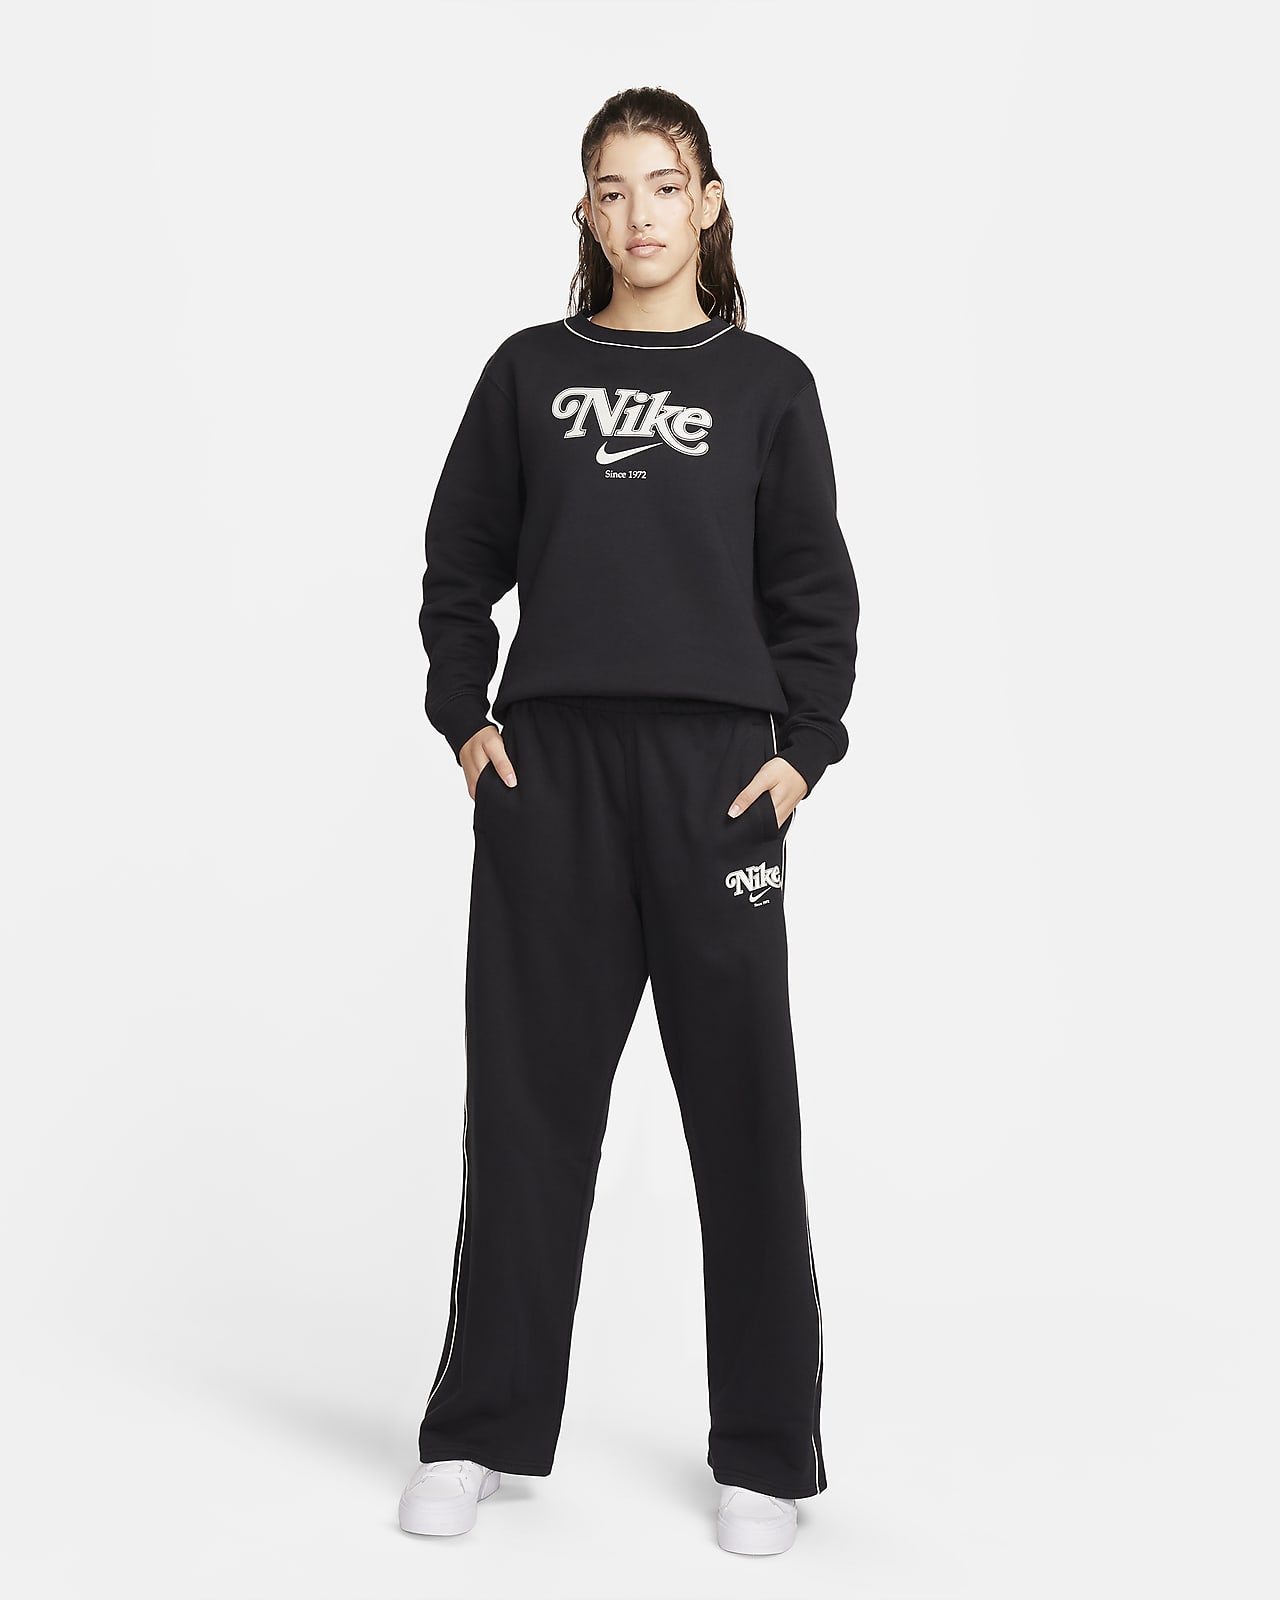 Nike Women's High-Waisted French Terry Pants Black DV7800-010 – Laced